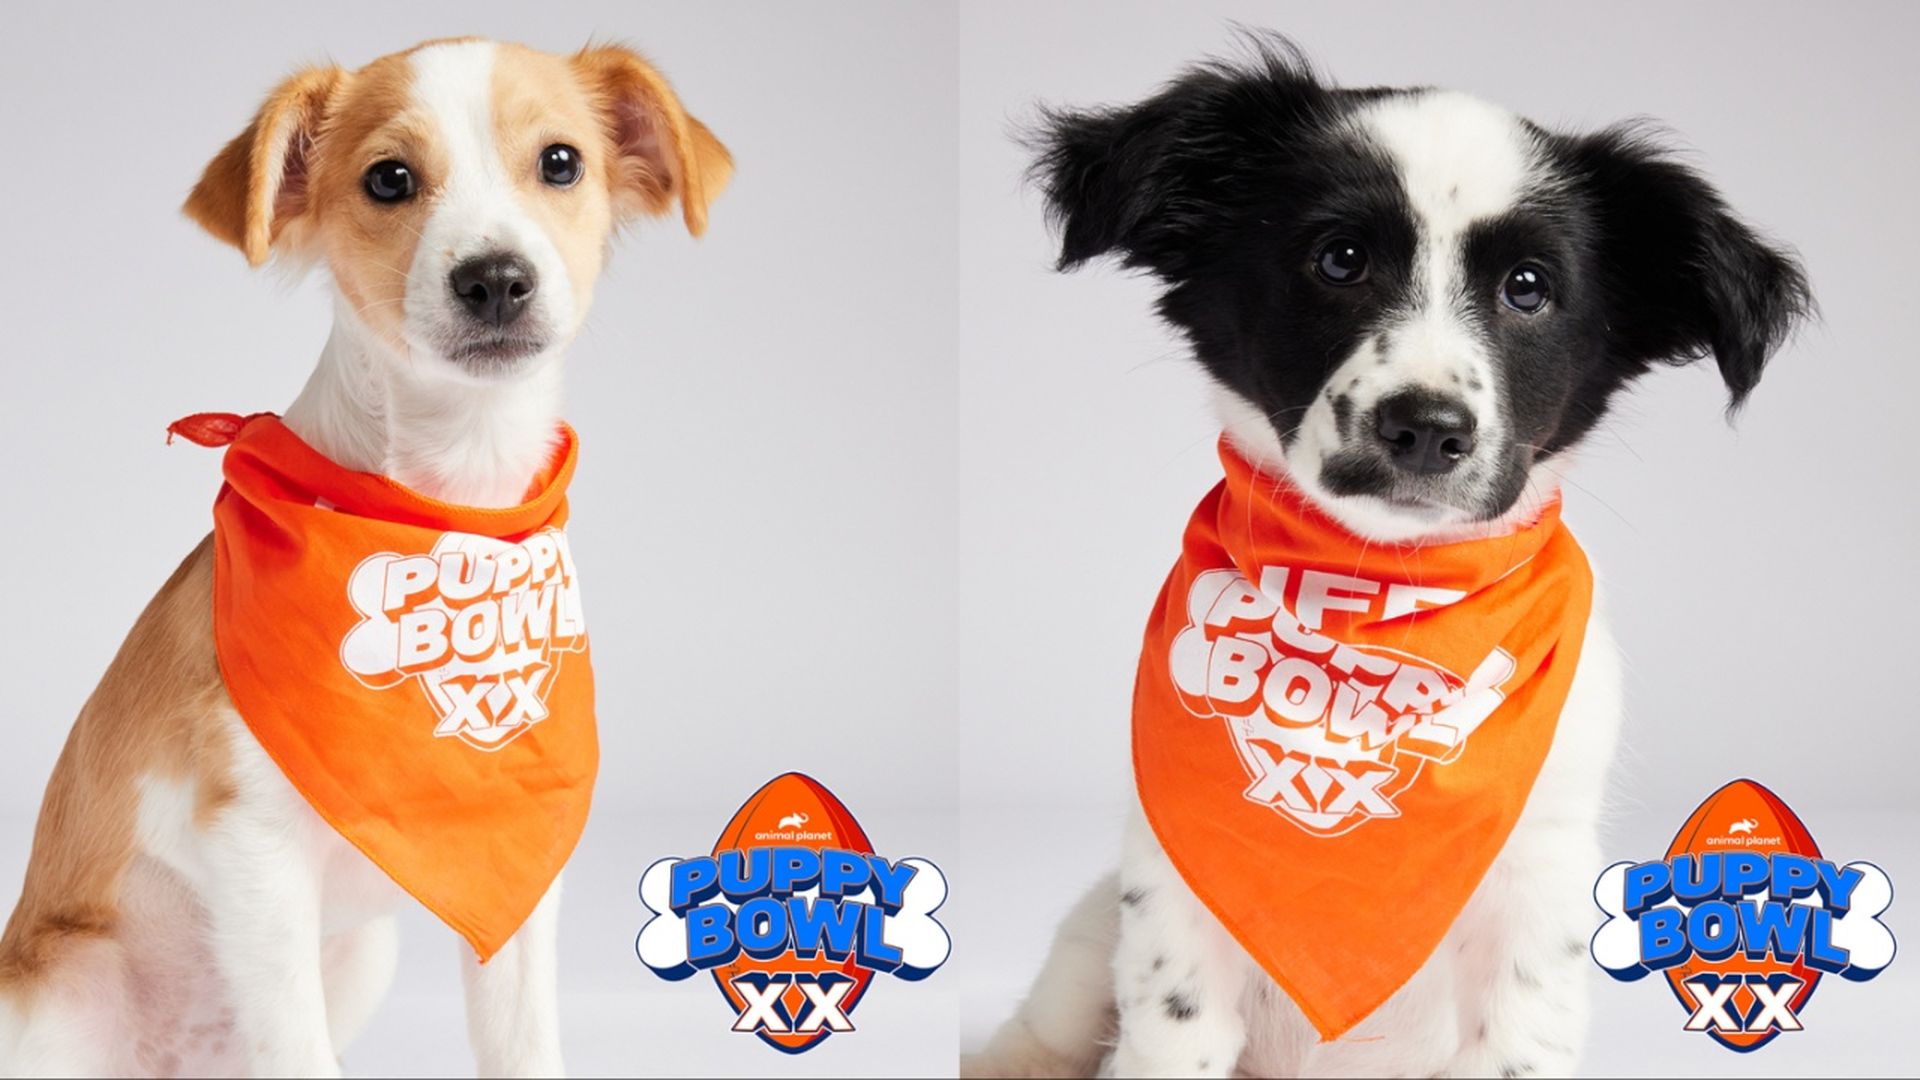 Two puppies pictured side by side, one with orange and white fur, the other with black and white fur. They're both wearing orange "Puppy Bowl XX" bandanas.